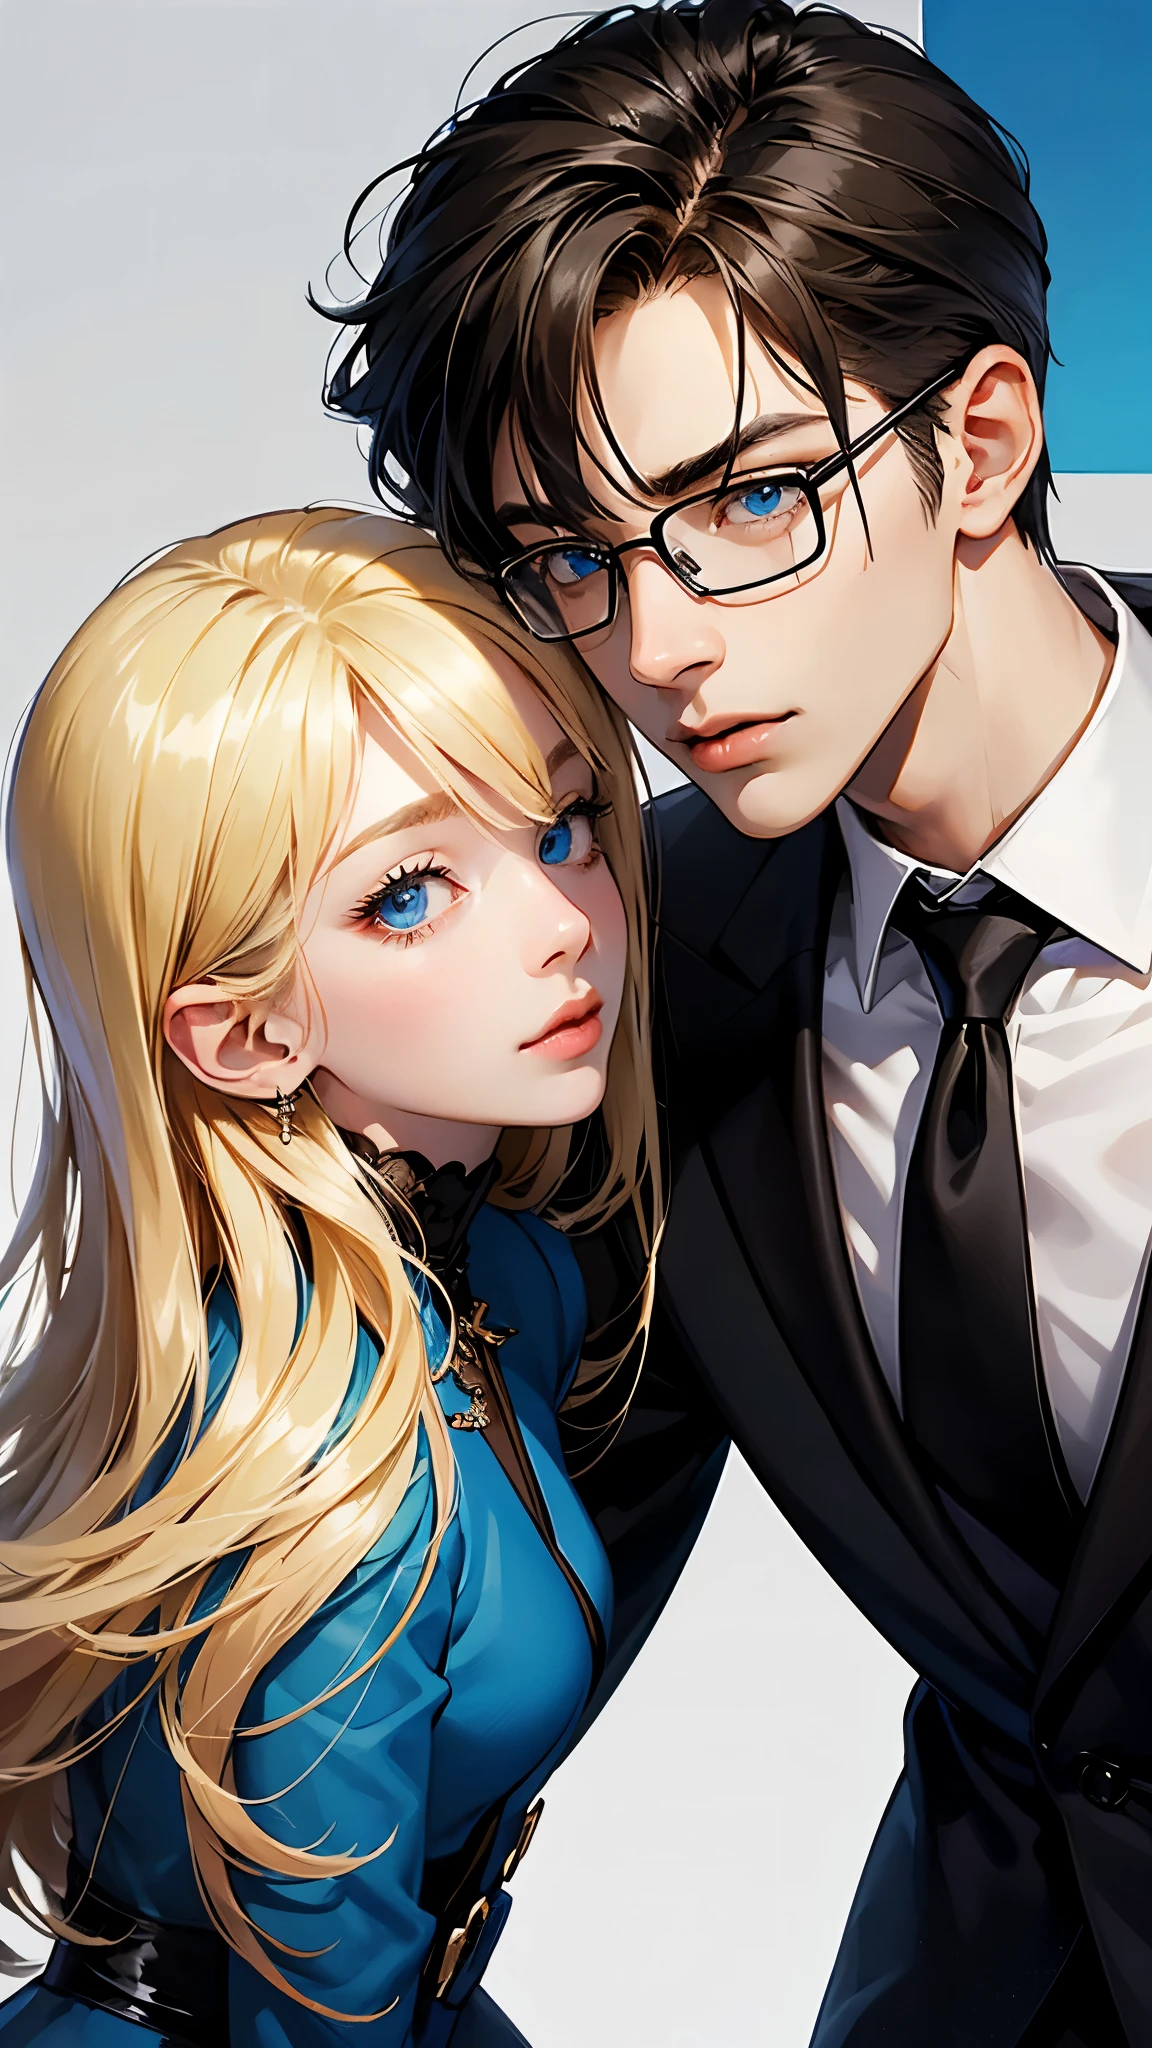 With anime style illustrations、A young man and woman couple appears。The man has blue eyes、Wearing a black suit jacket。The woman is blonde and wears glasses.、She&#39;s wearing soft pink clothes。The two of them pose intimately、The background has vibrant blue and pink tones that evoke a romantic atmosphere.。A woman grabs a man&#39;s jacket、It emphasizes the intimacy between the two。They&#39;re both in the same position、sit side by side。